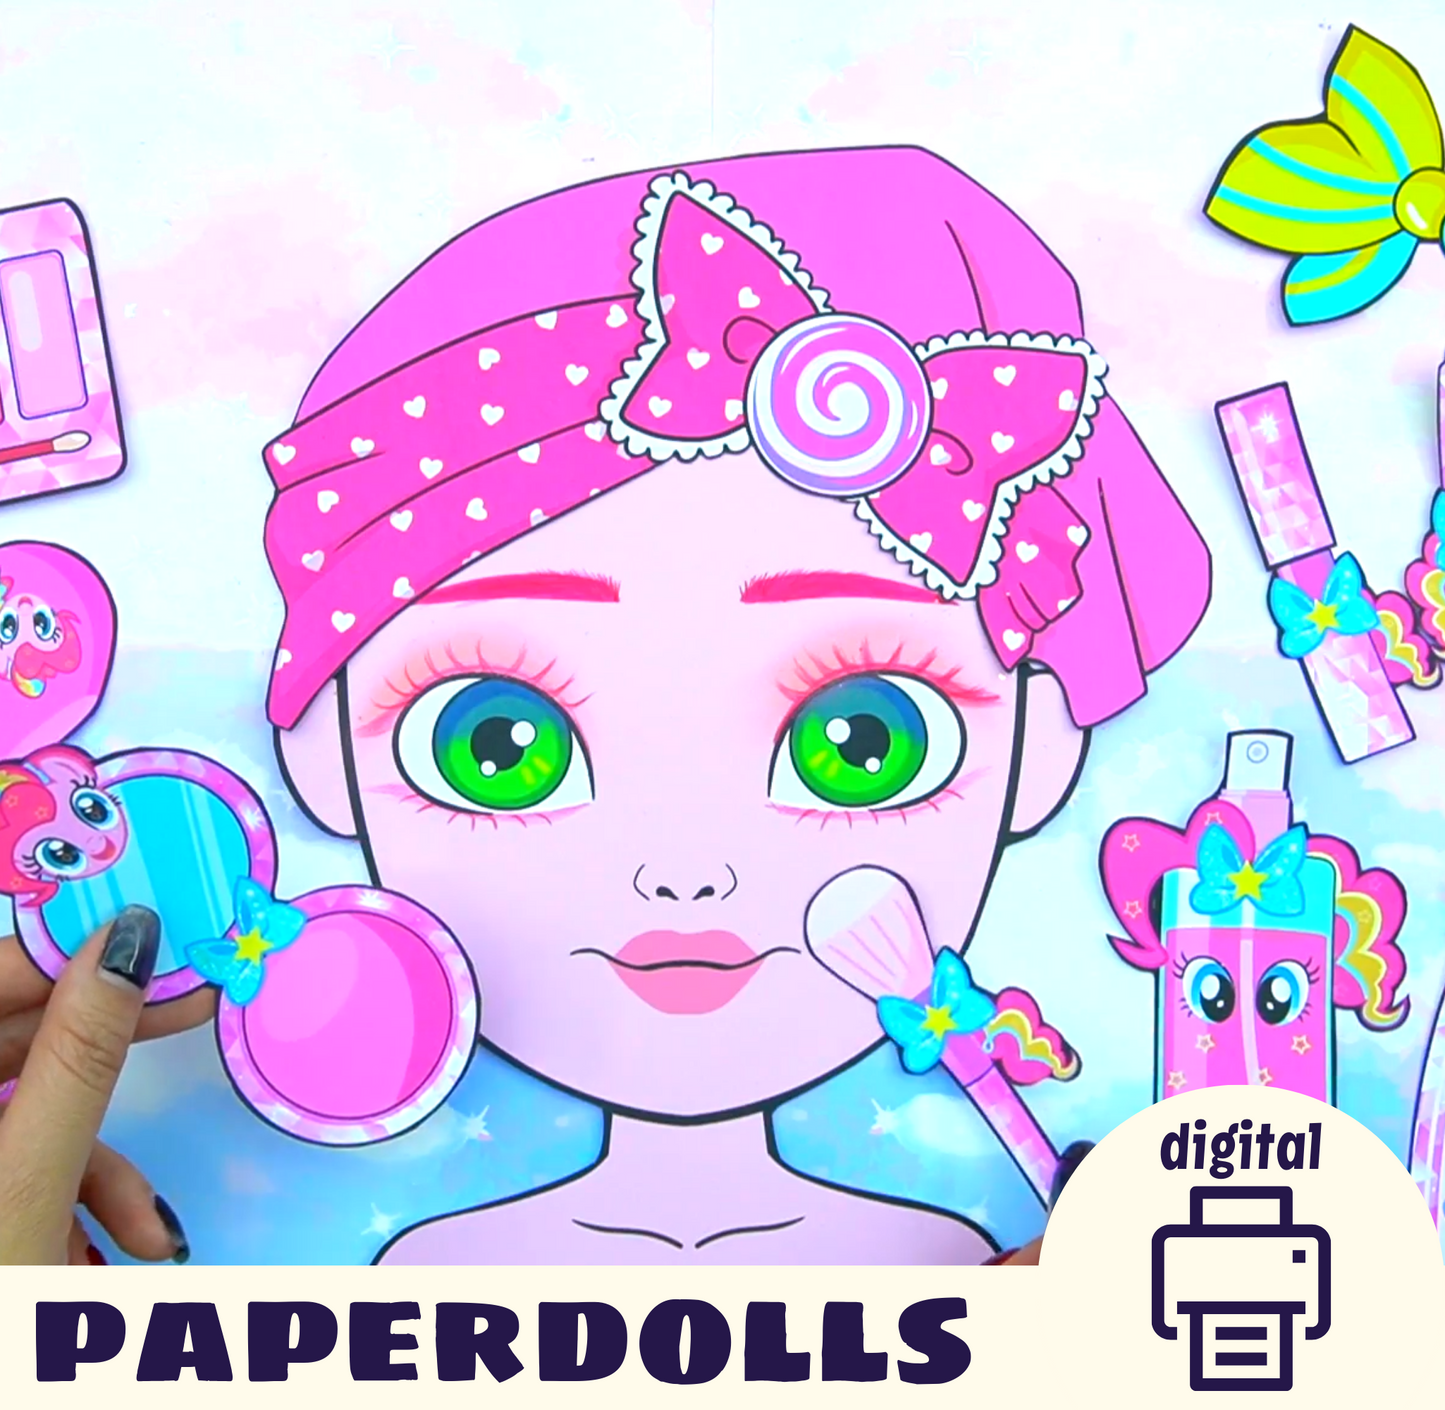 Barbie Make up mini set 💃 29 pages Printable Paper Dollhouse | 😍 Paper Doll House | DIY crafts for kids | Woa Doll Crafts